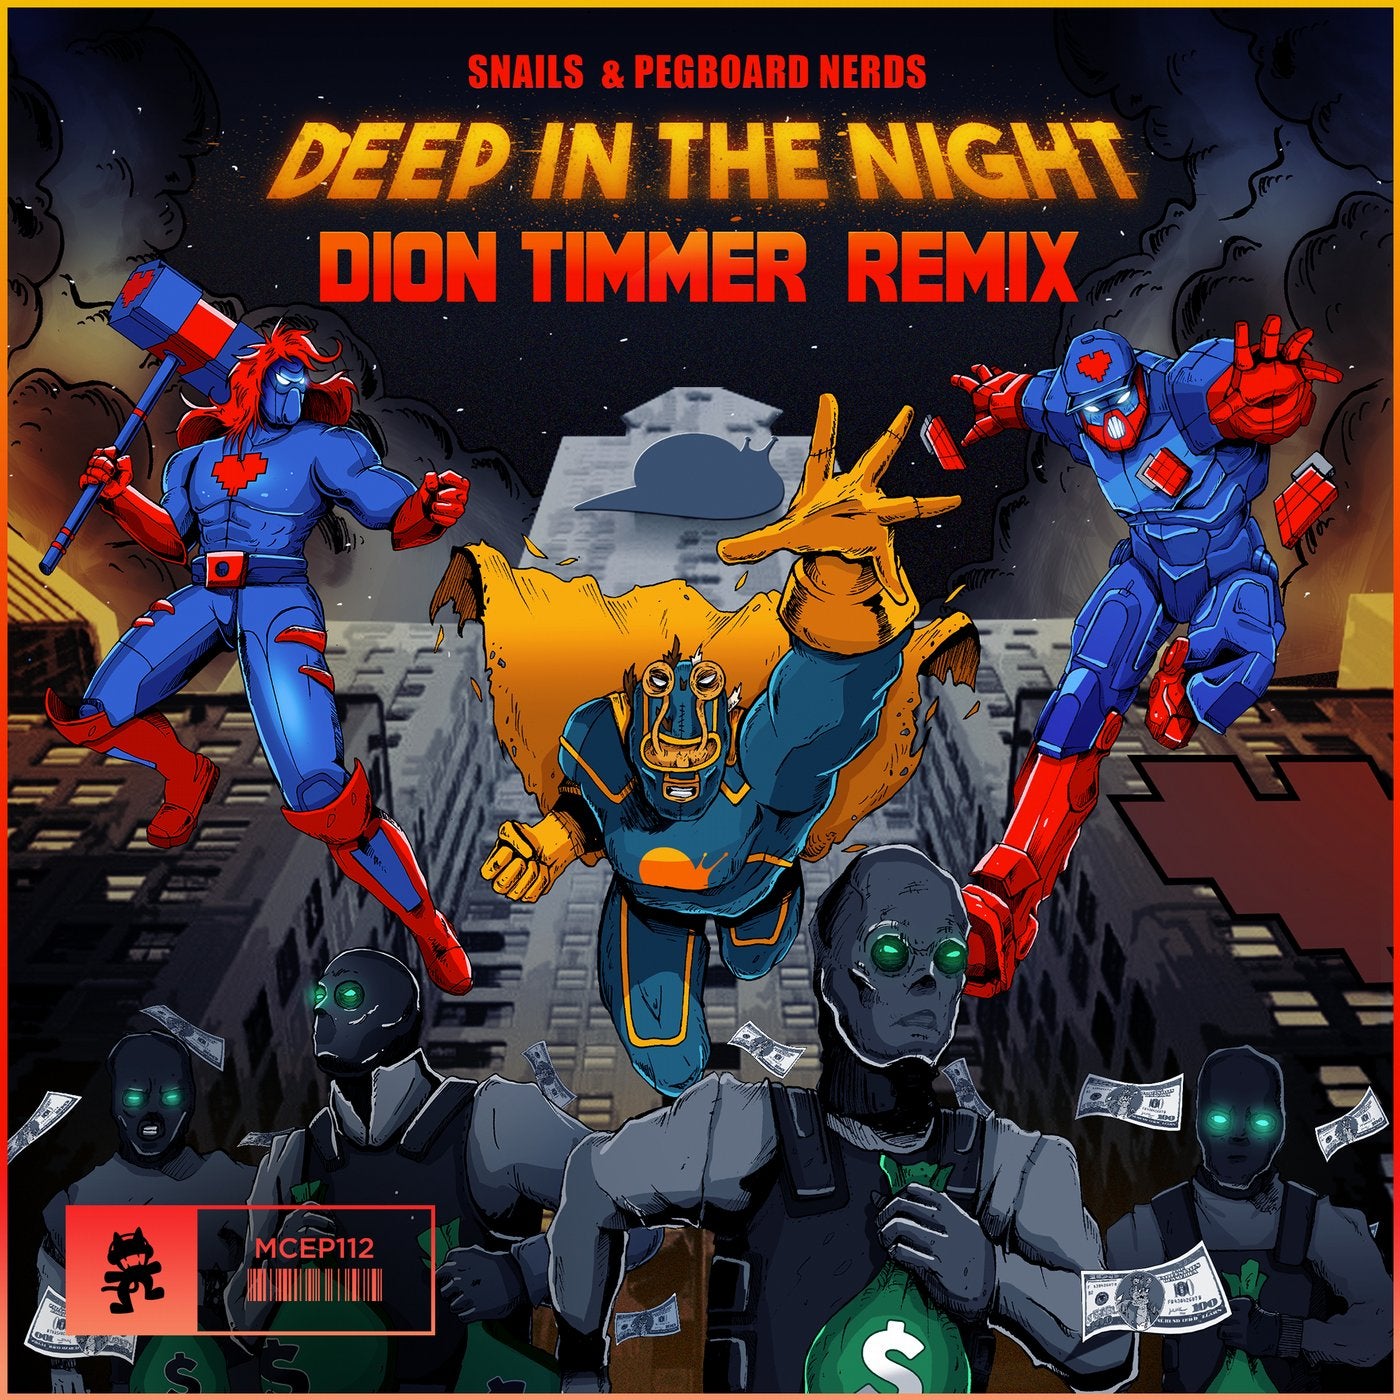 Deep in the Night - Dion Timmer Remix